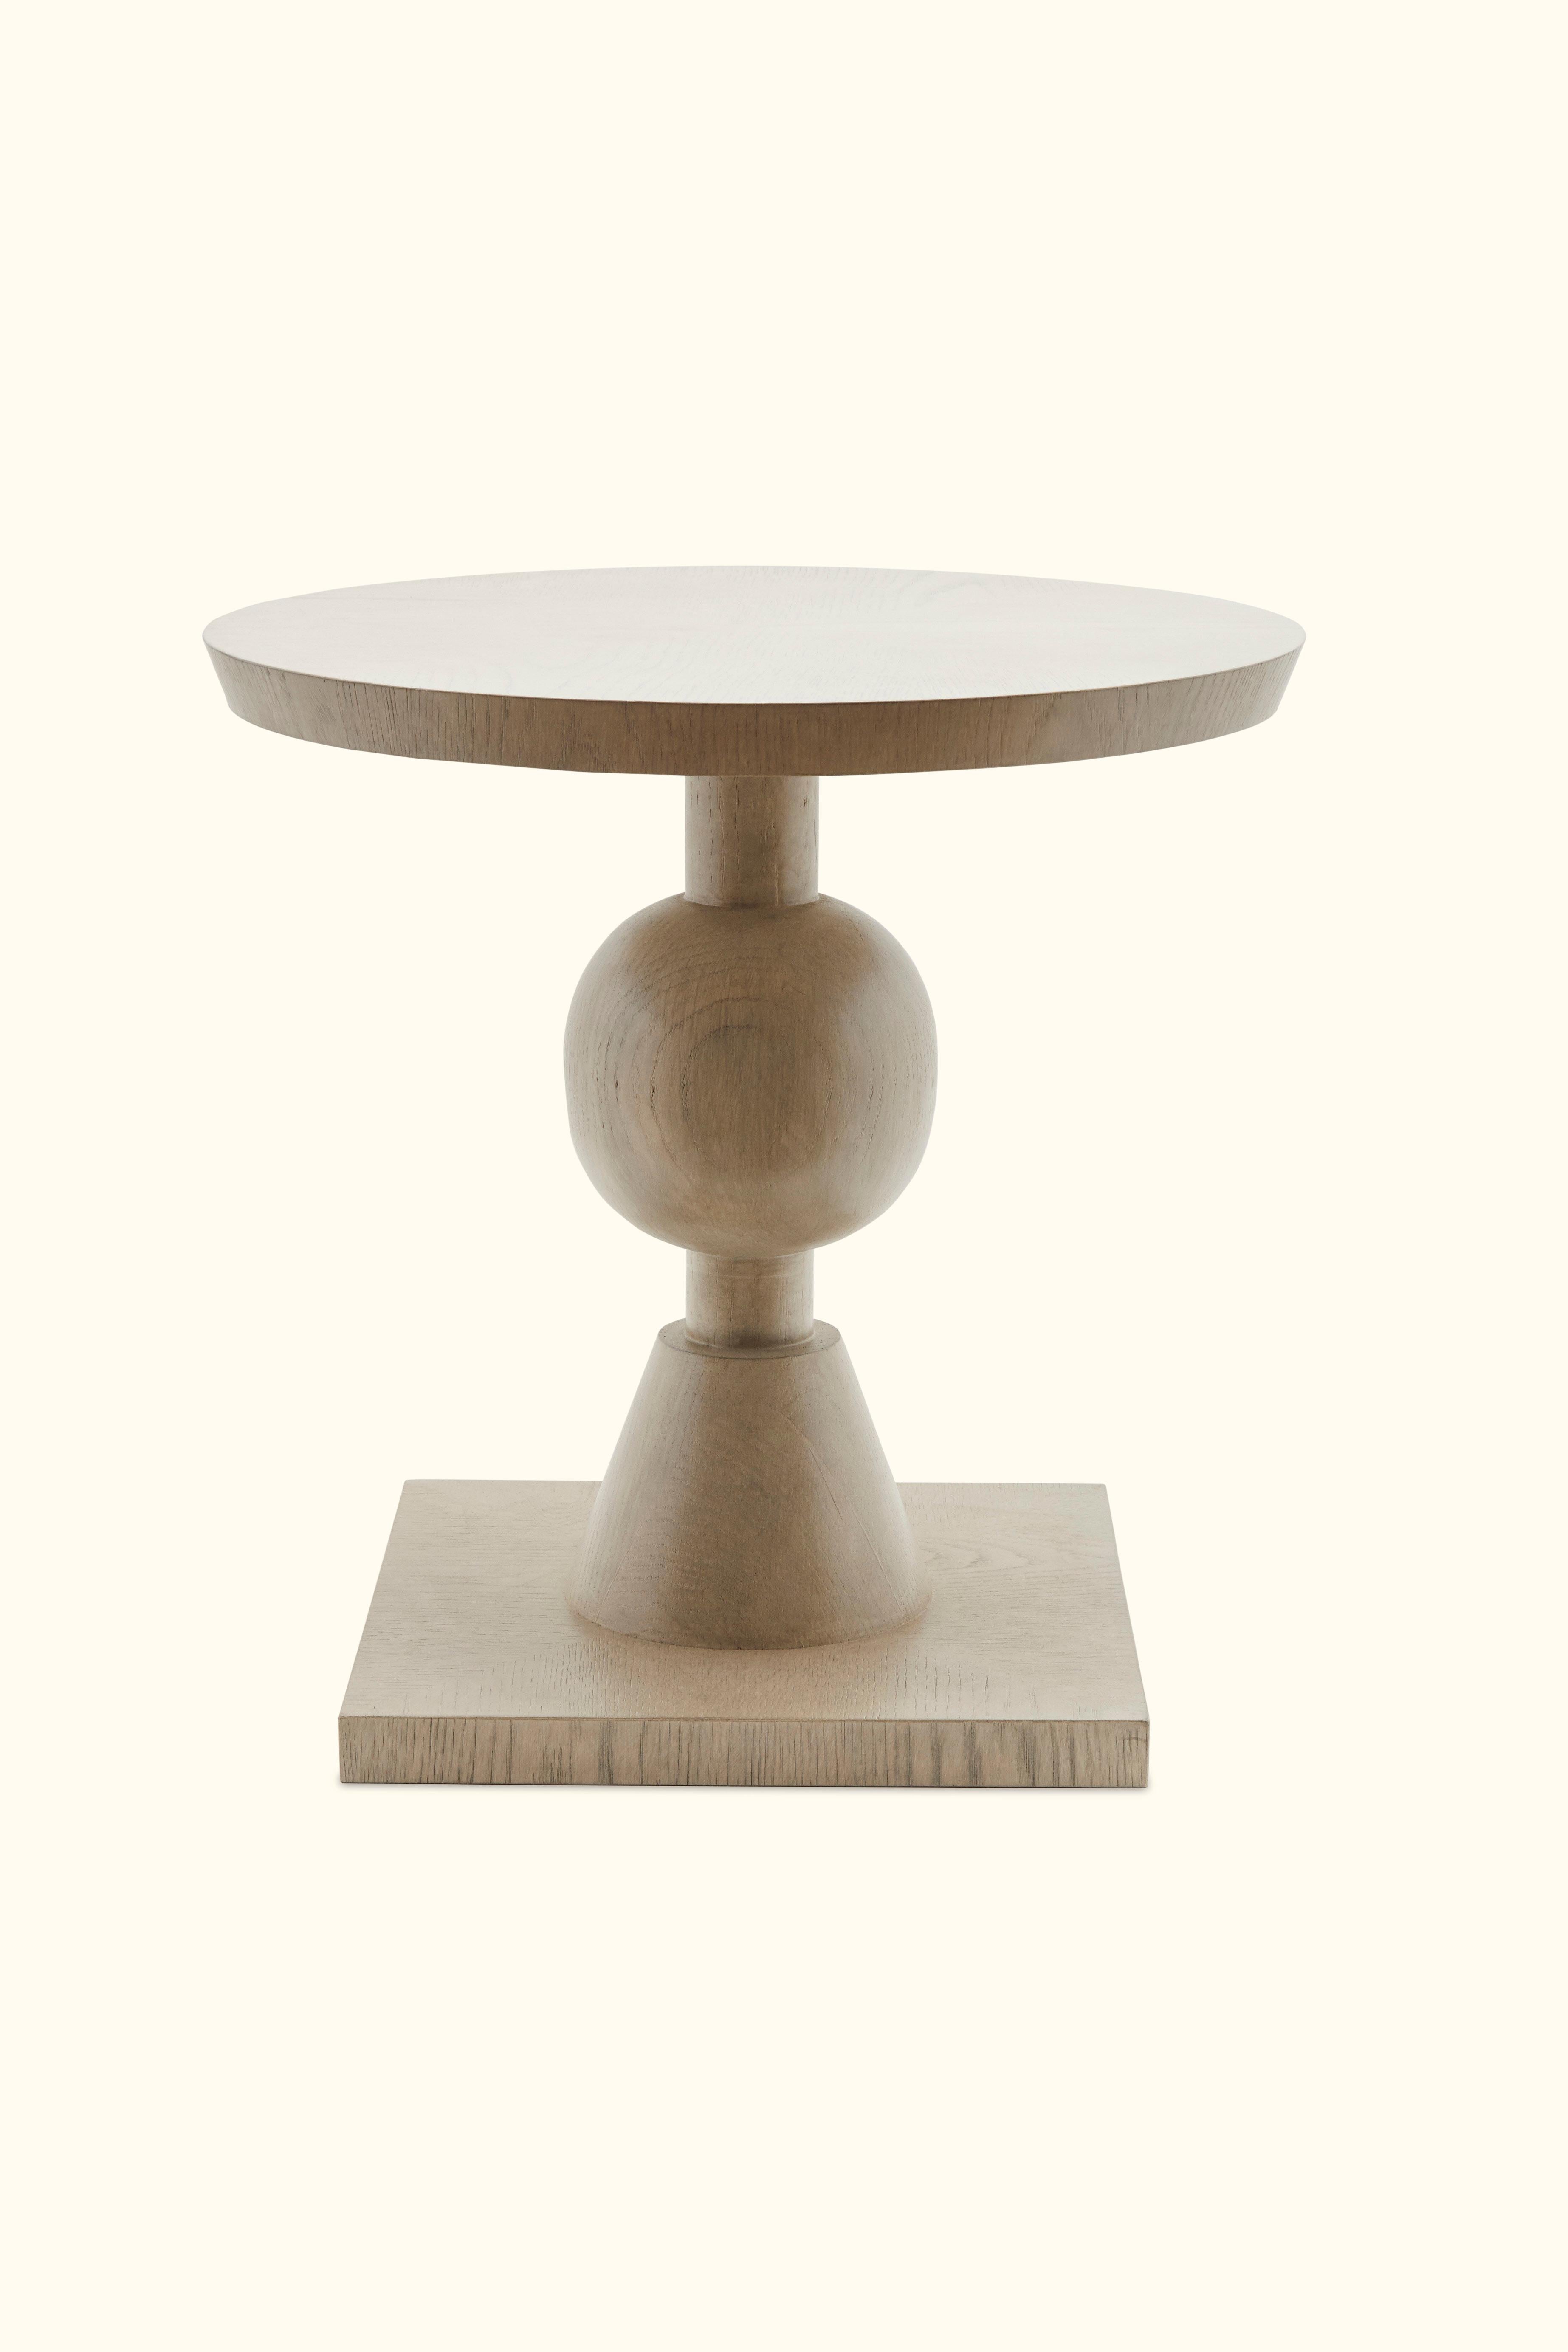 White Washed Oak Sur Table by Lawson-Fenning. The Sur Table features a series of geometric shapes stacked on top of each other with solid wood details. Available in American walnut or white oak.

The Lawson-Fenning Collection is designed and